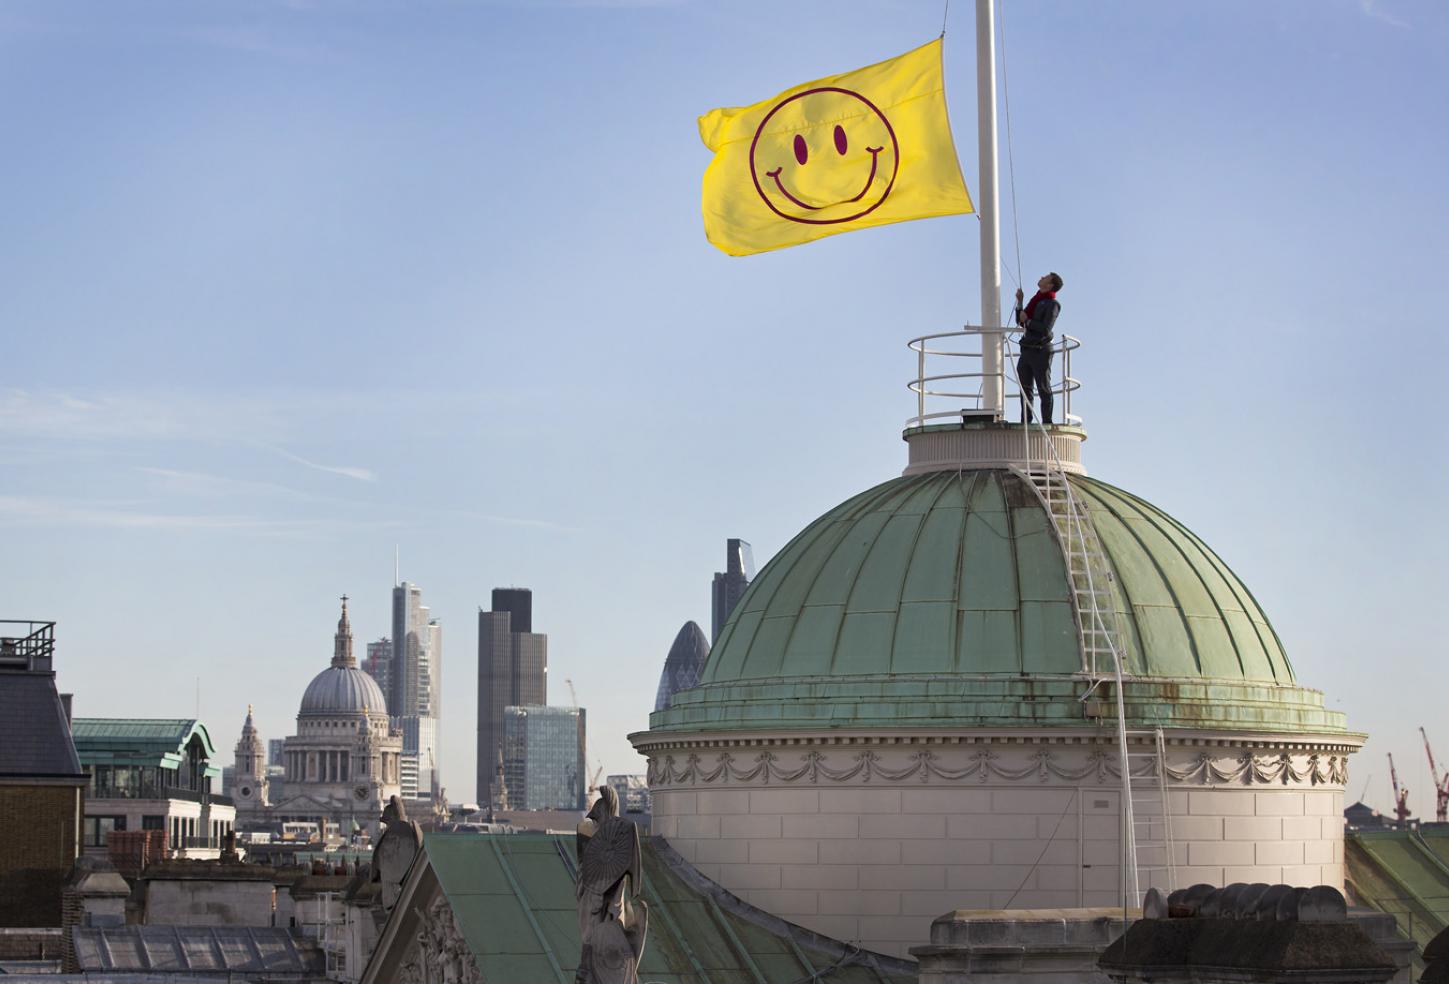 A flag designed by Jeremy Deller and Fraser Muggeridge studio is raised to the top of Somerset House as part of the launch of 'UTOPIA 2016 - A Year of Imagination and Possibility'